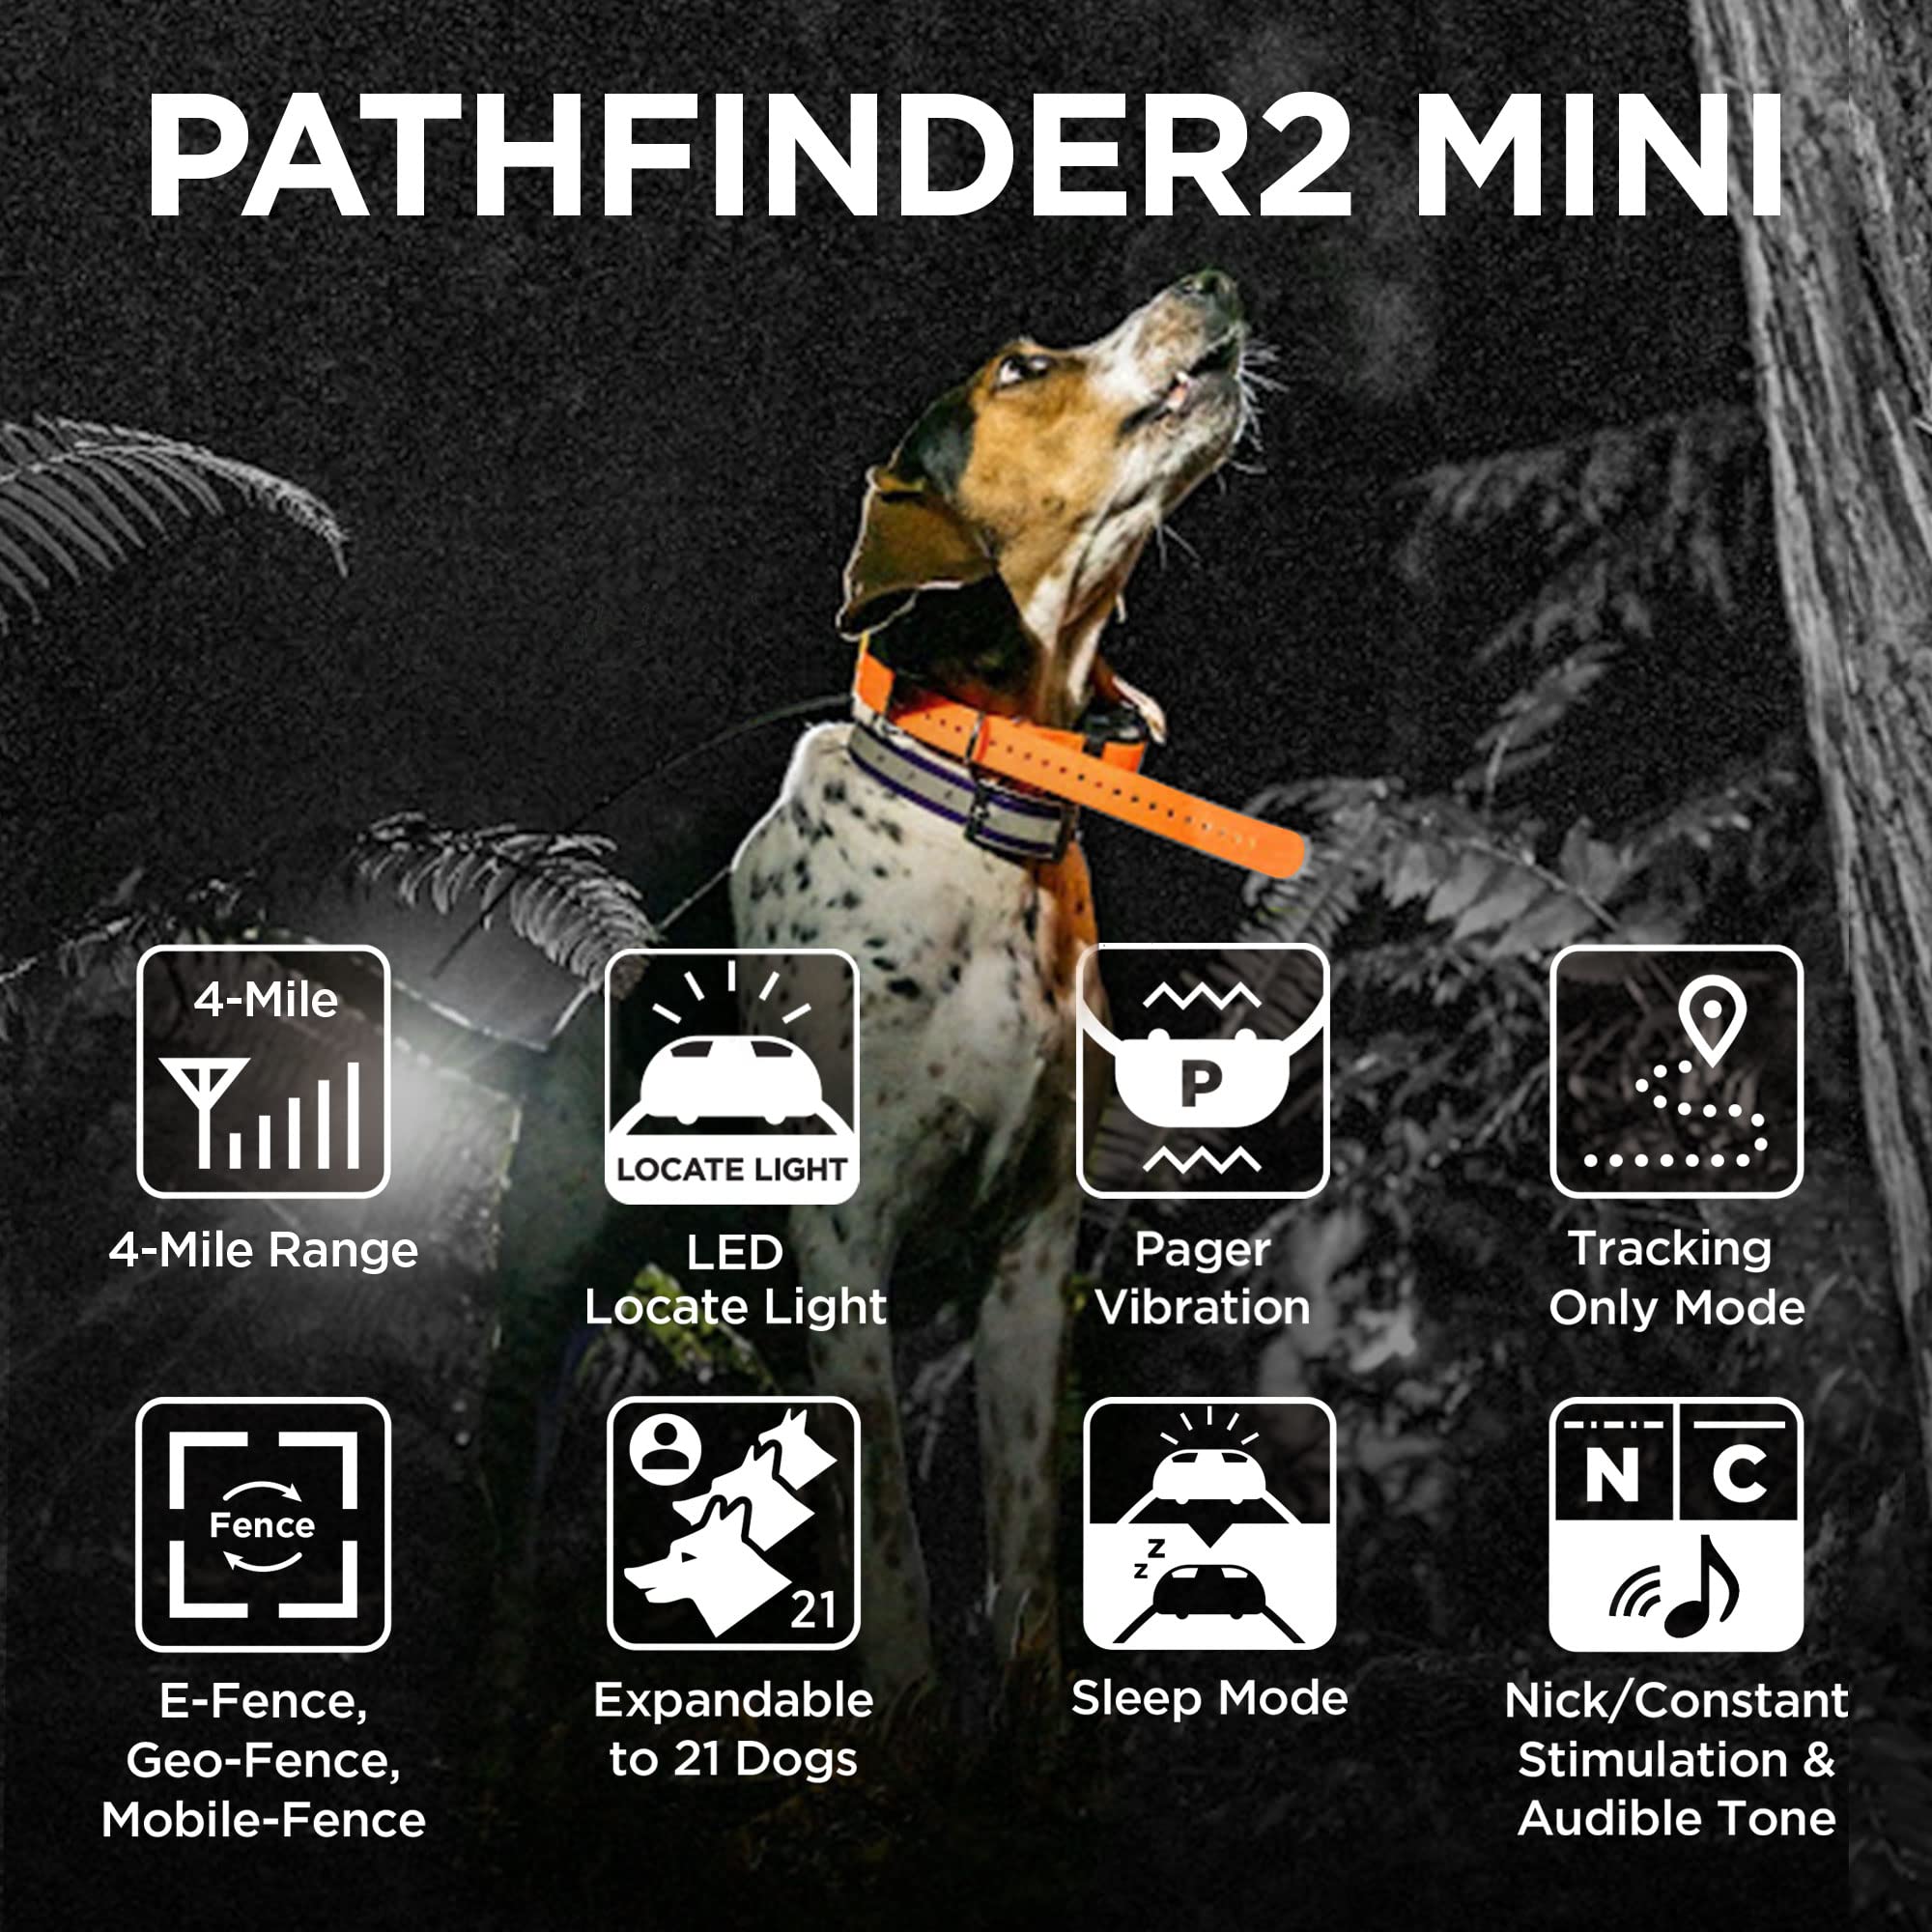 Dogtra PATHFINDER 2 MINI Additional Receiver Dog GPS Tracker e Collar Green LED Light No monthly fees Free App Waterproof Smartwatch control Satellite Real Time tracking long range Smartphone required